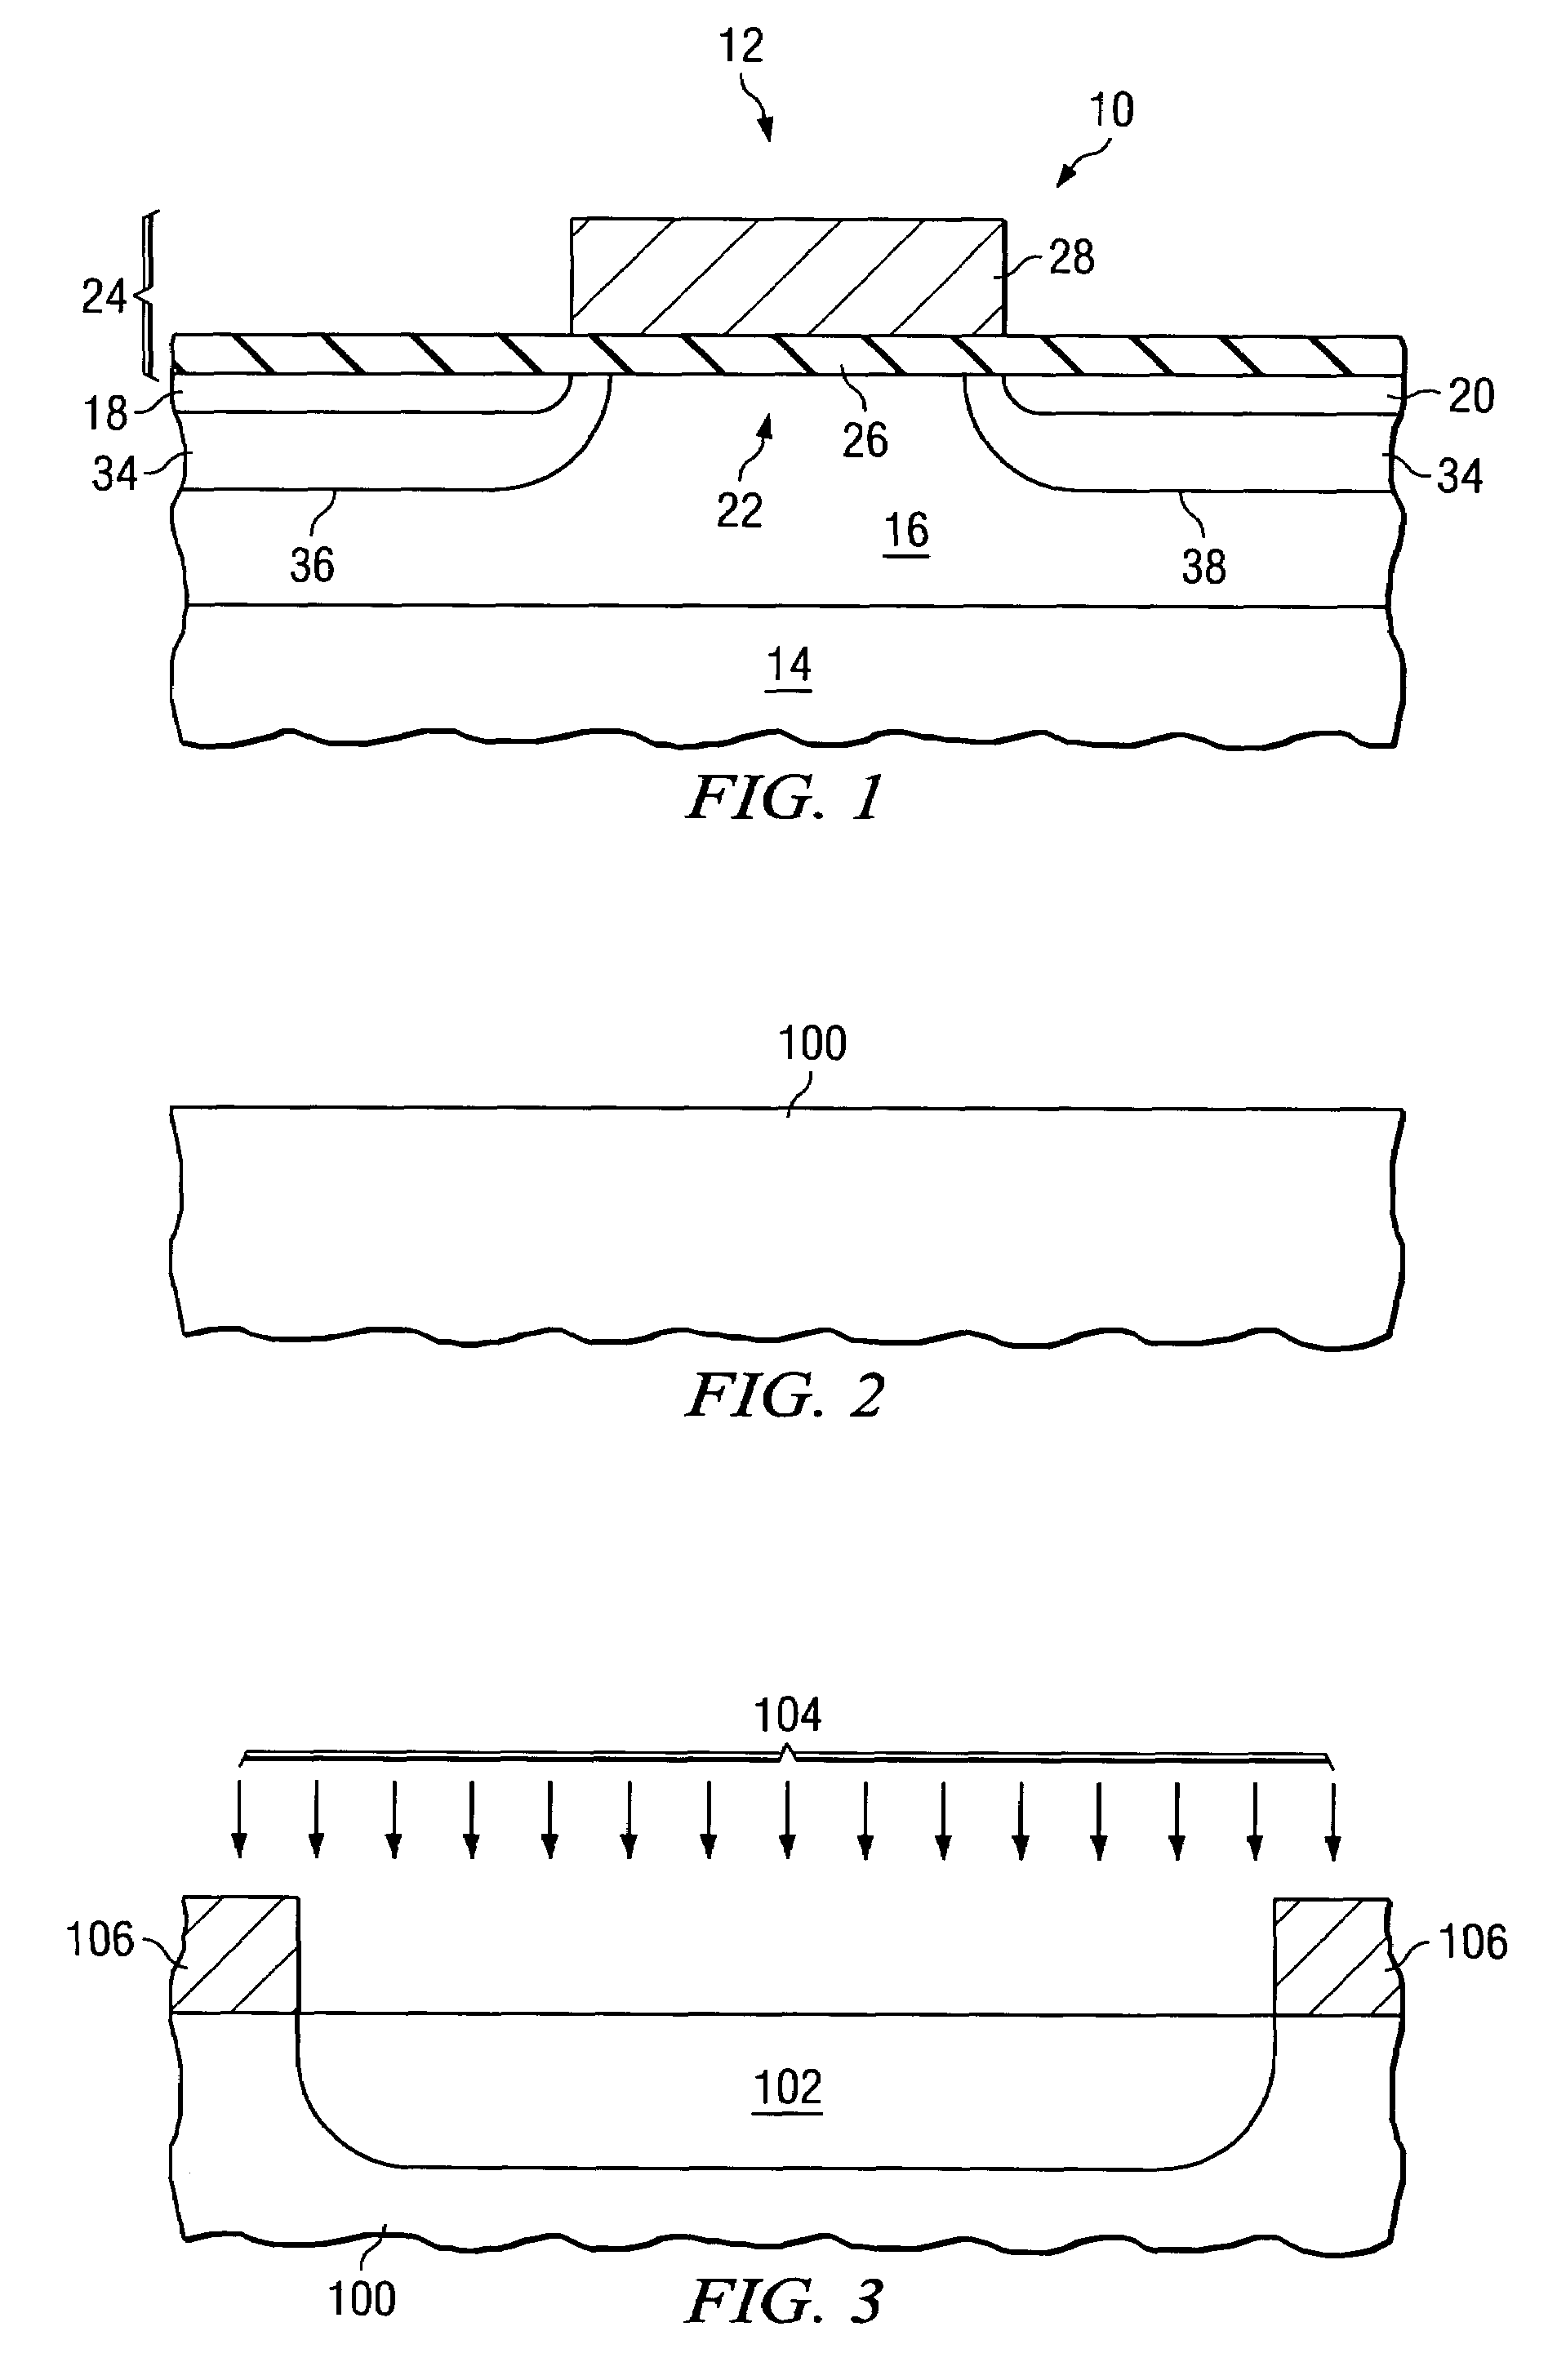 Fabrication of an OTP-EPROM having reduced leakage current